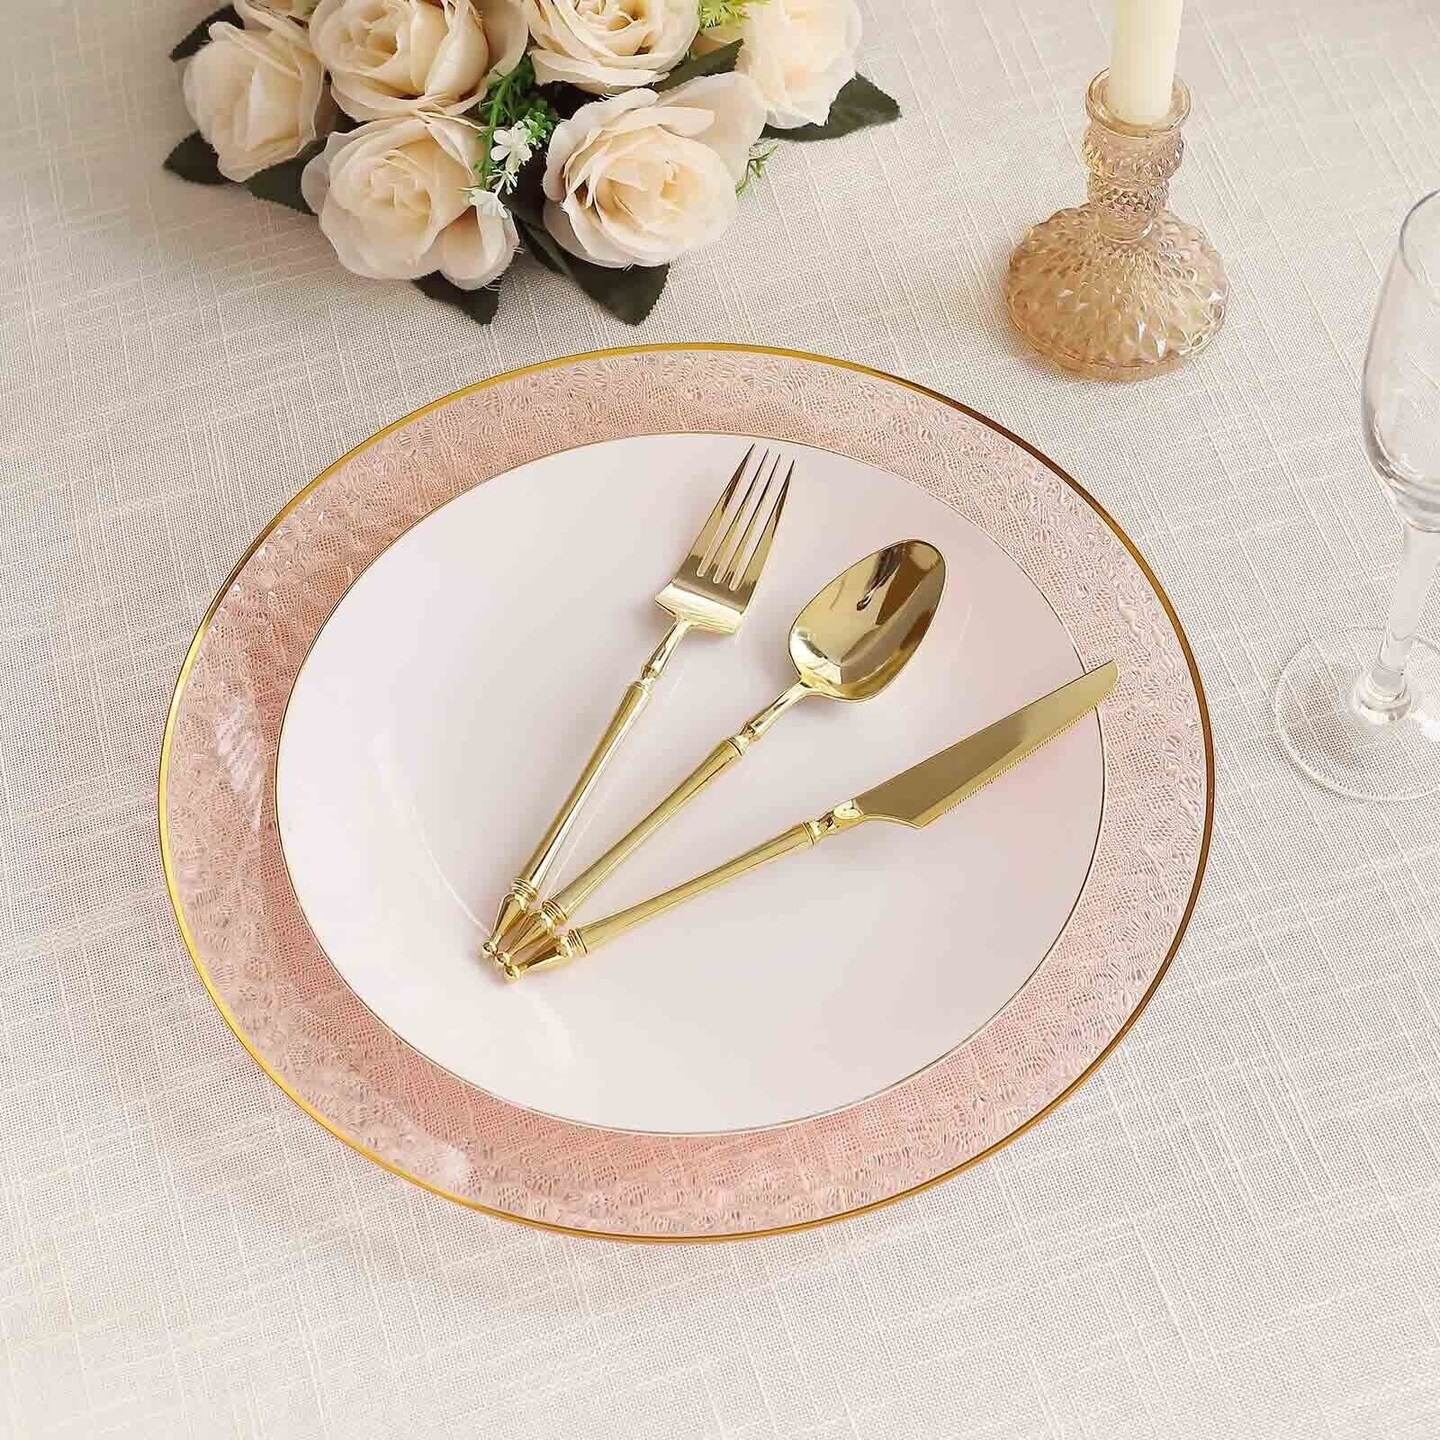 10 Blush 13 in Round Hammered Plastic CHARGER PLATES